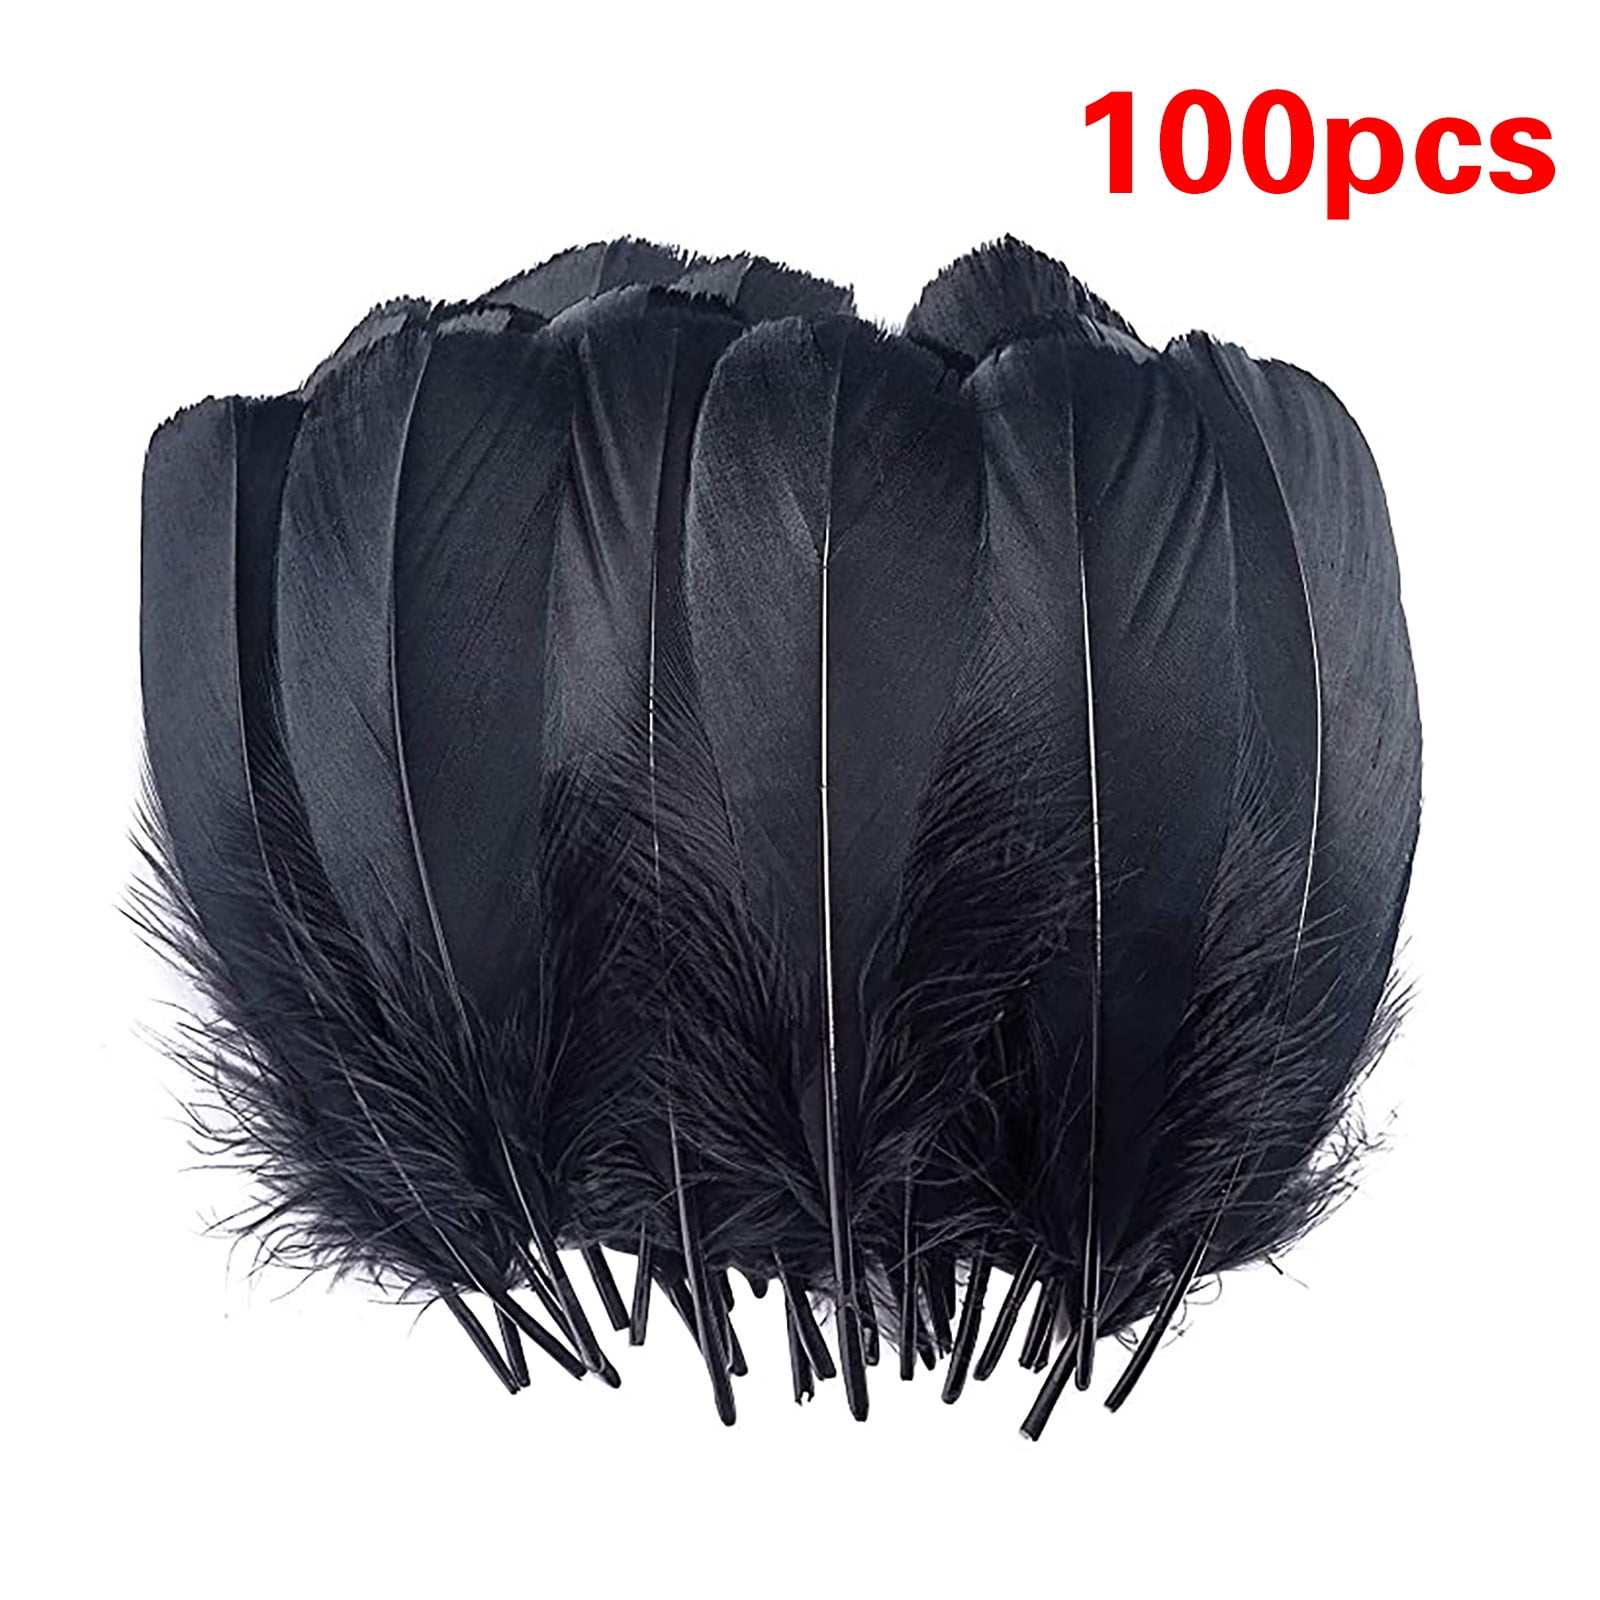 15pcs Yellow Dyed Rooster Feathers 12-20cm DIY Art Craft Millinery Dream Catcher 